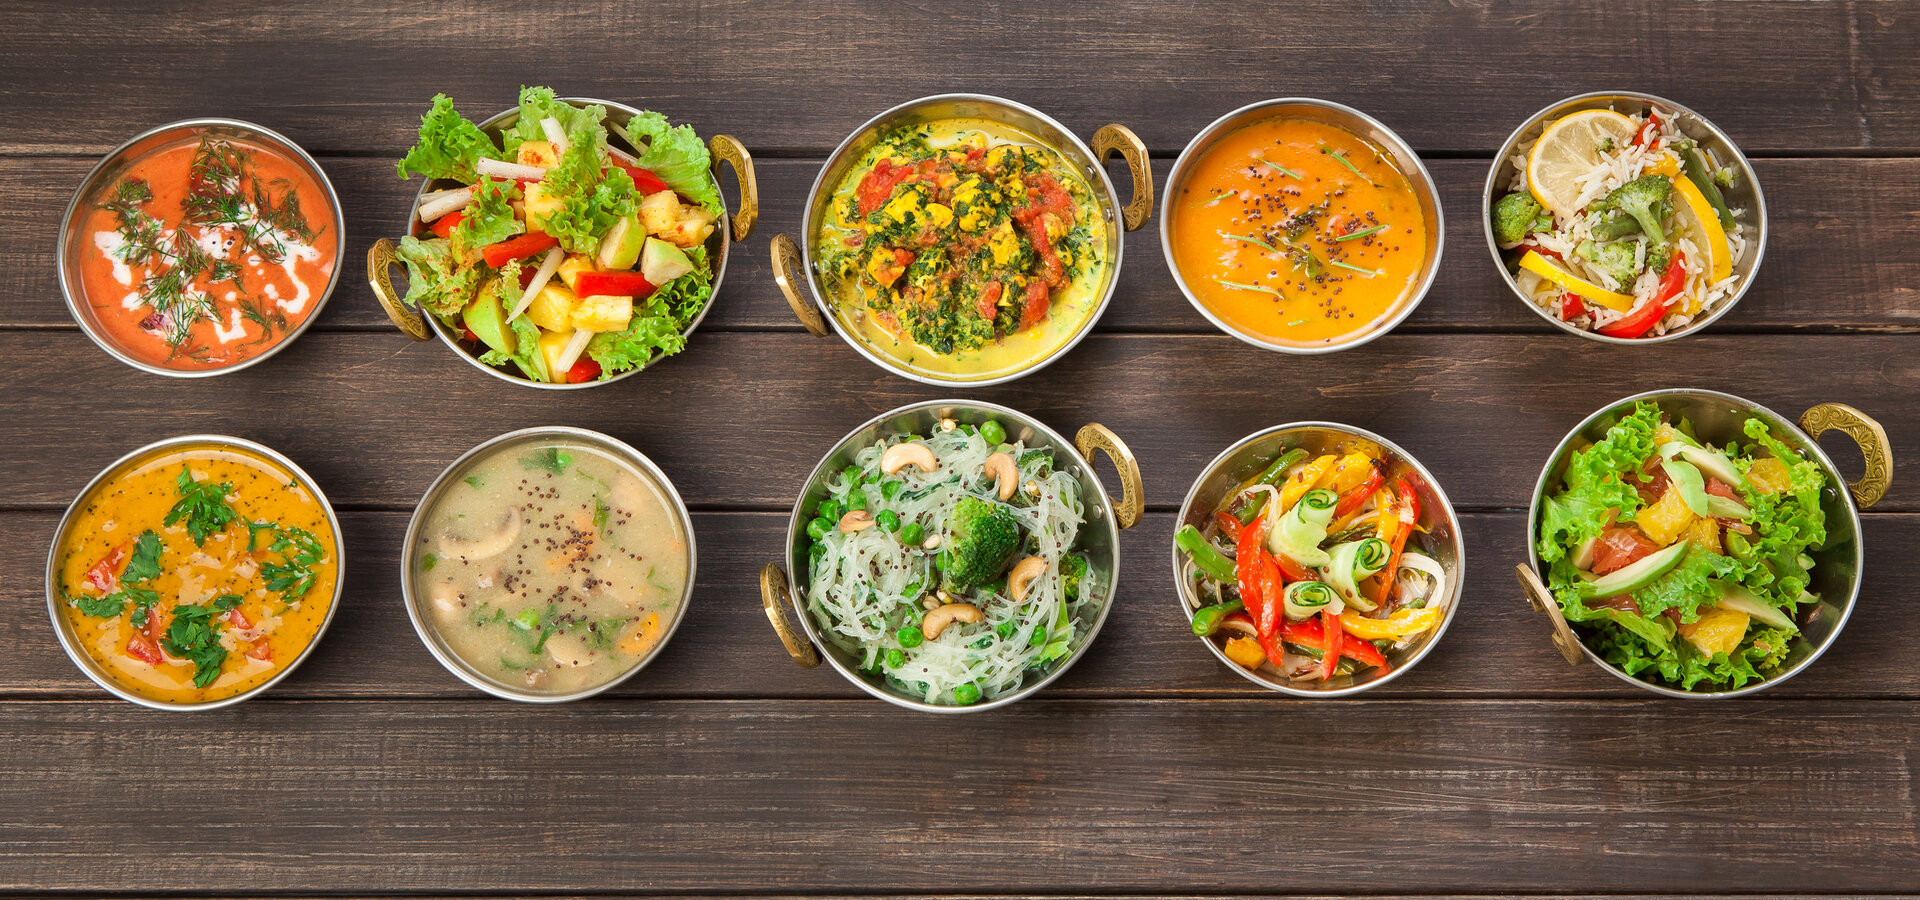 Vegetarian Dishes from India